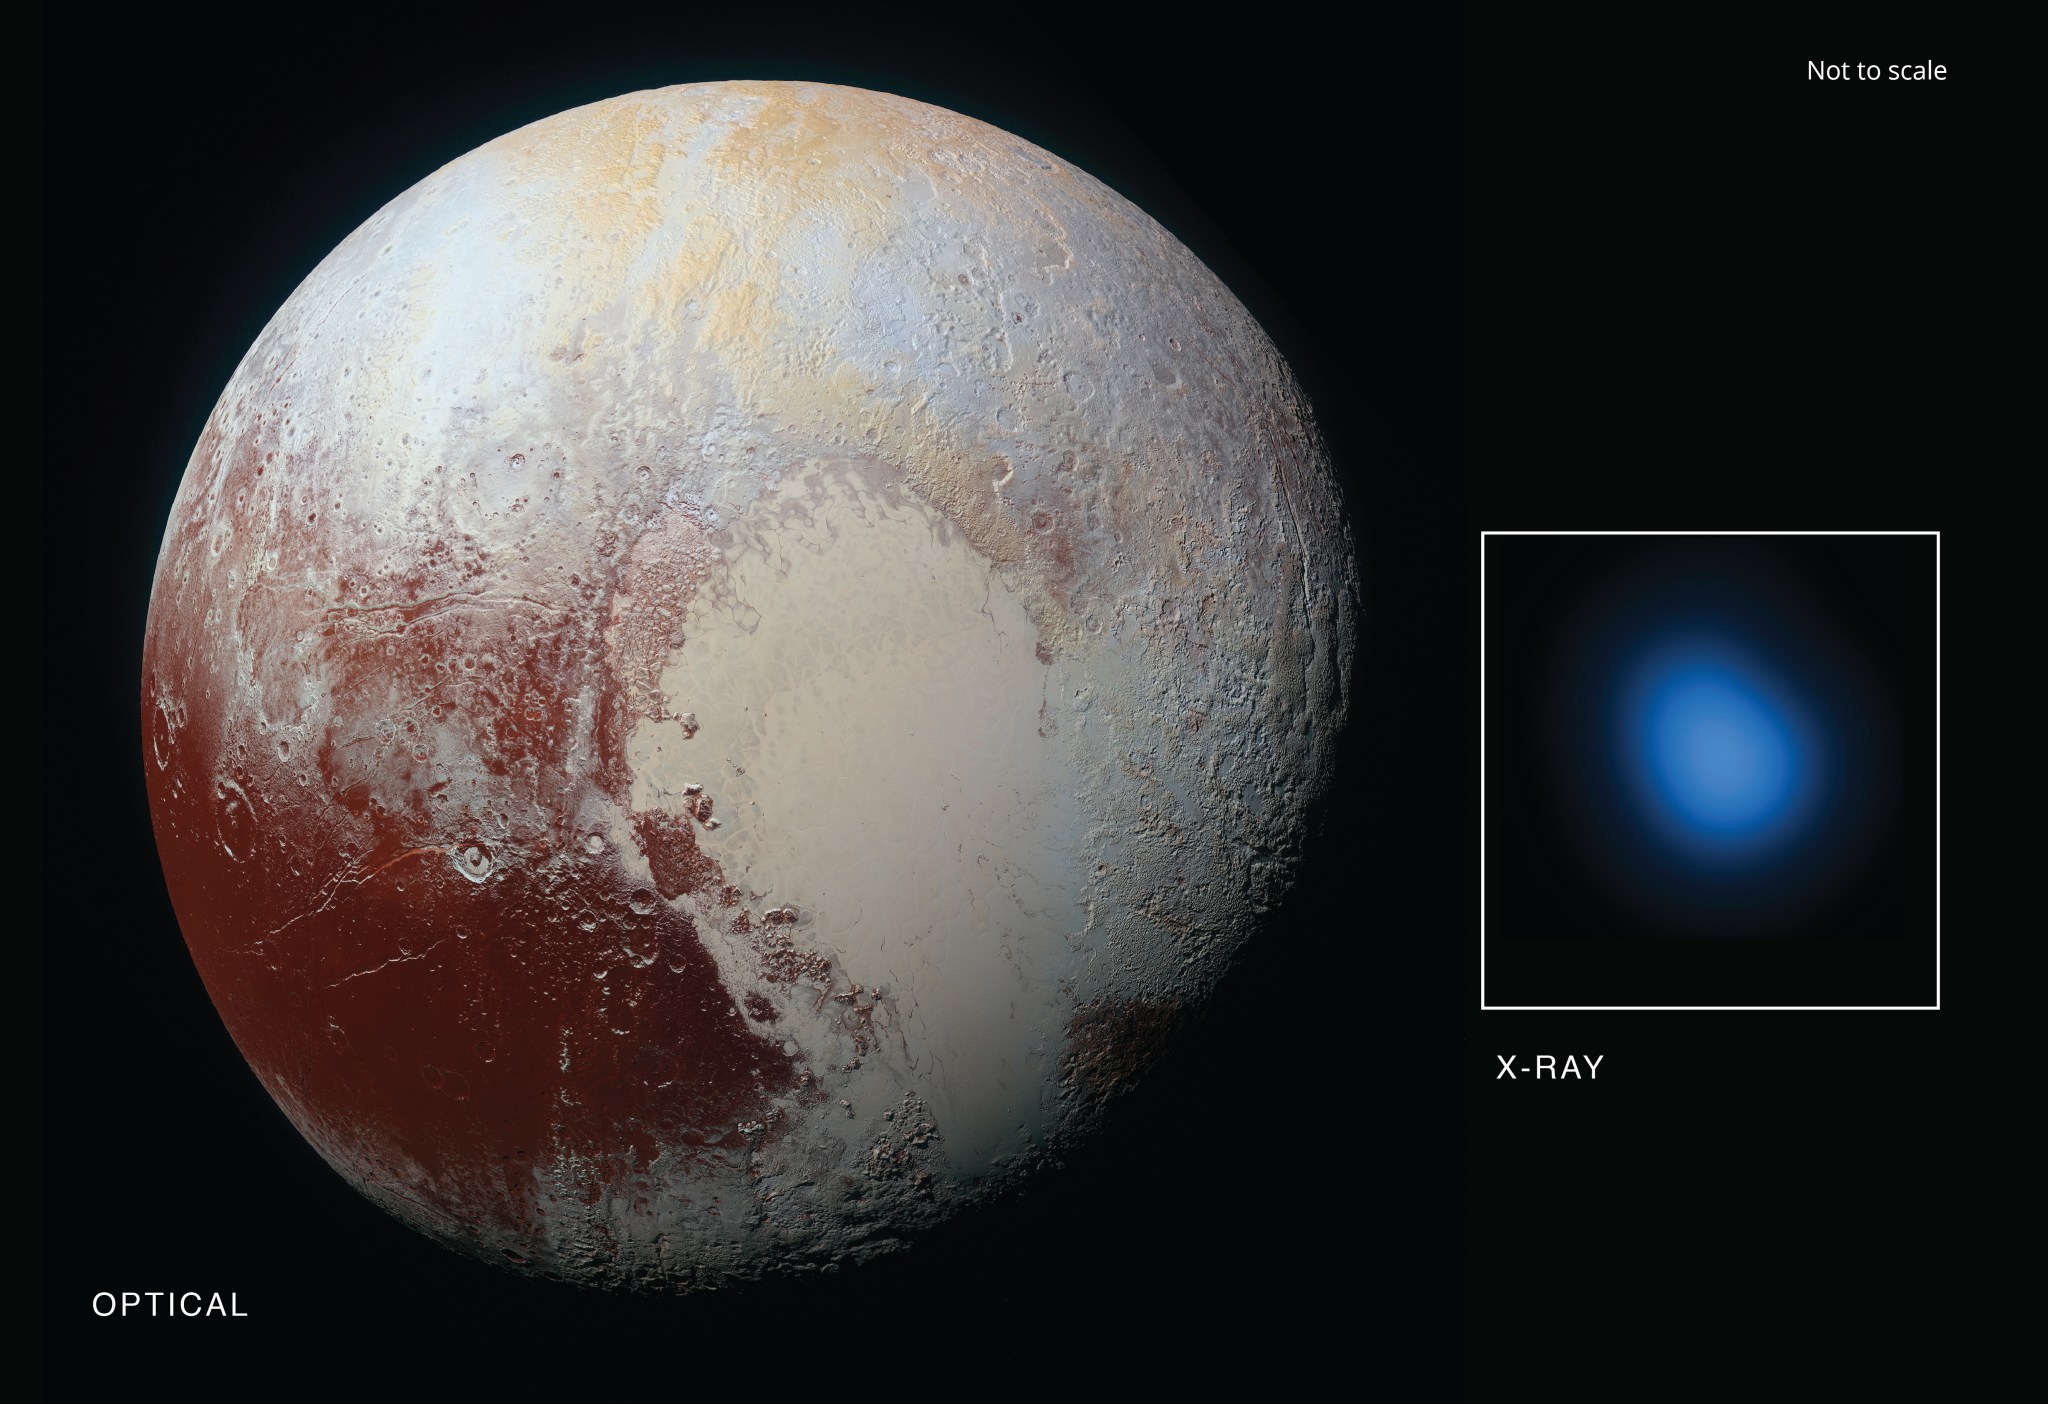 The first detection of Pluto in X-rays has been made using NASA’s Chandra X-ray Observatory.